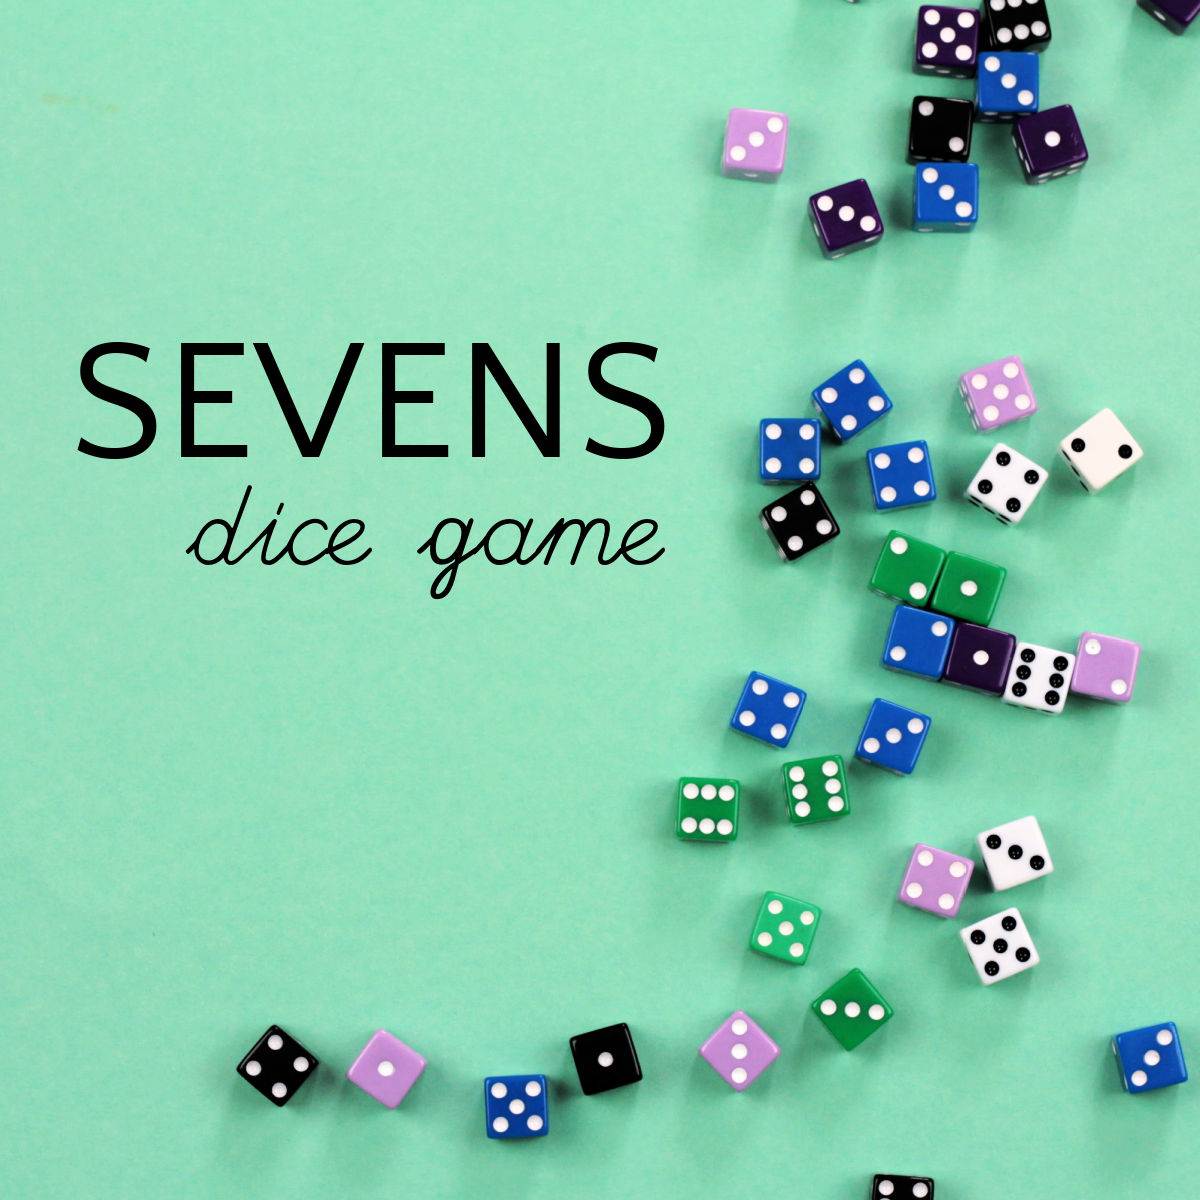 Colored dice spread across an aqua colored background for sevens dice game